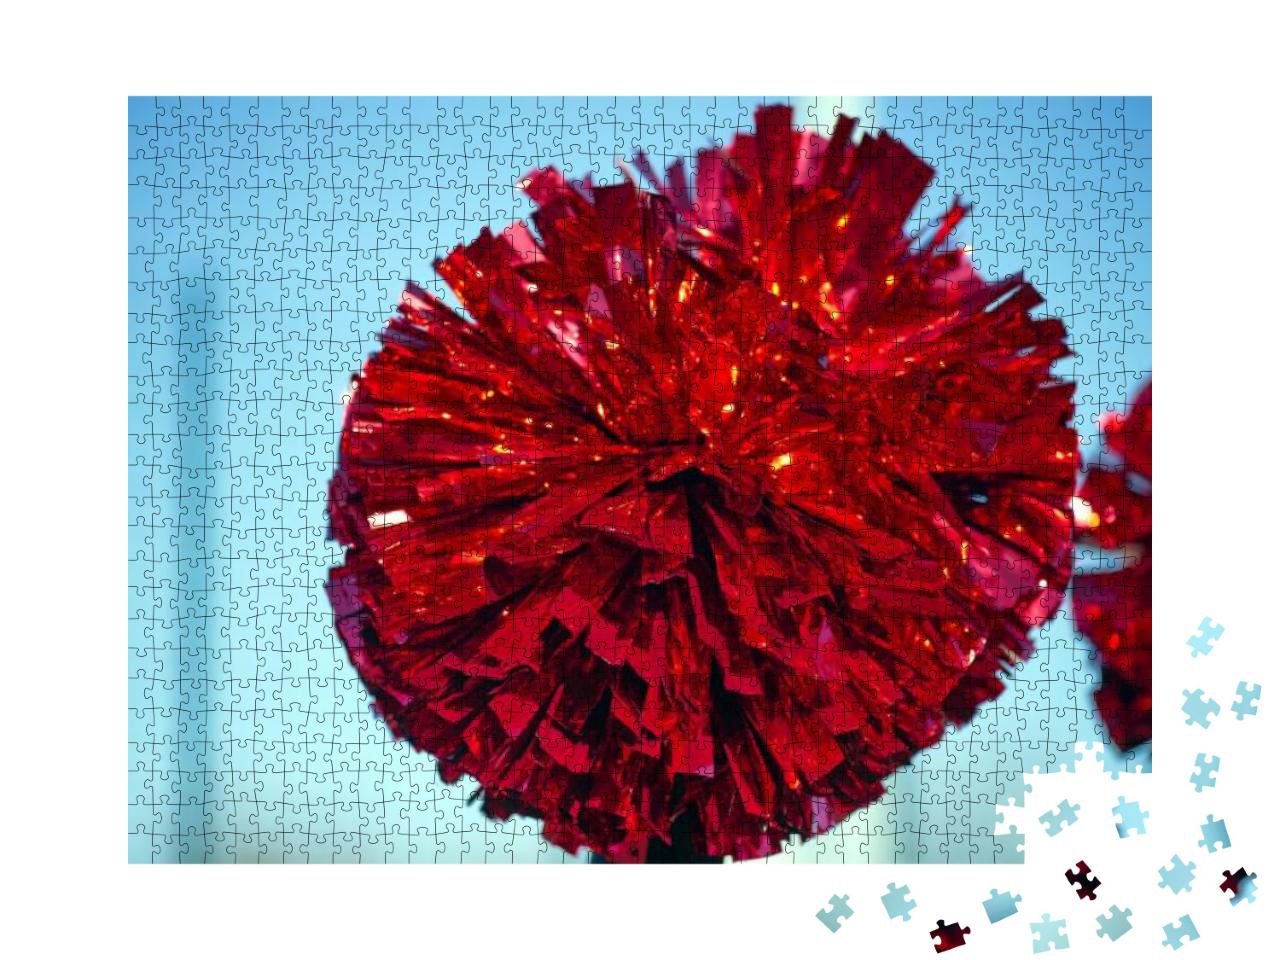 Cheerleader Pom Poms... Jigsaw Puzzle with 1000 pieces